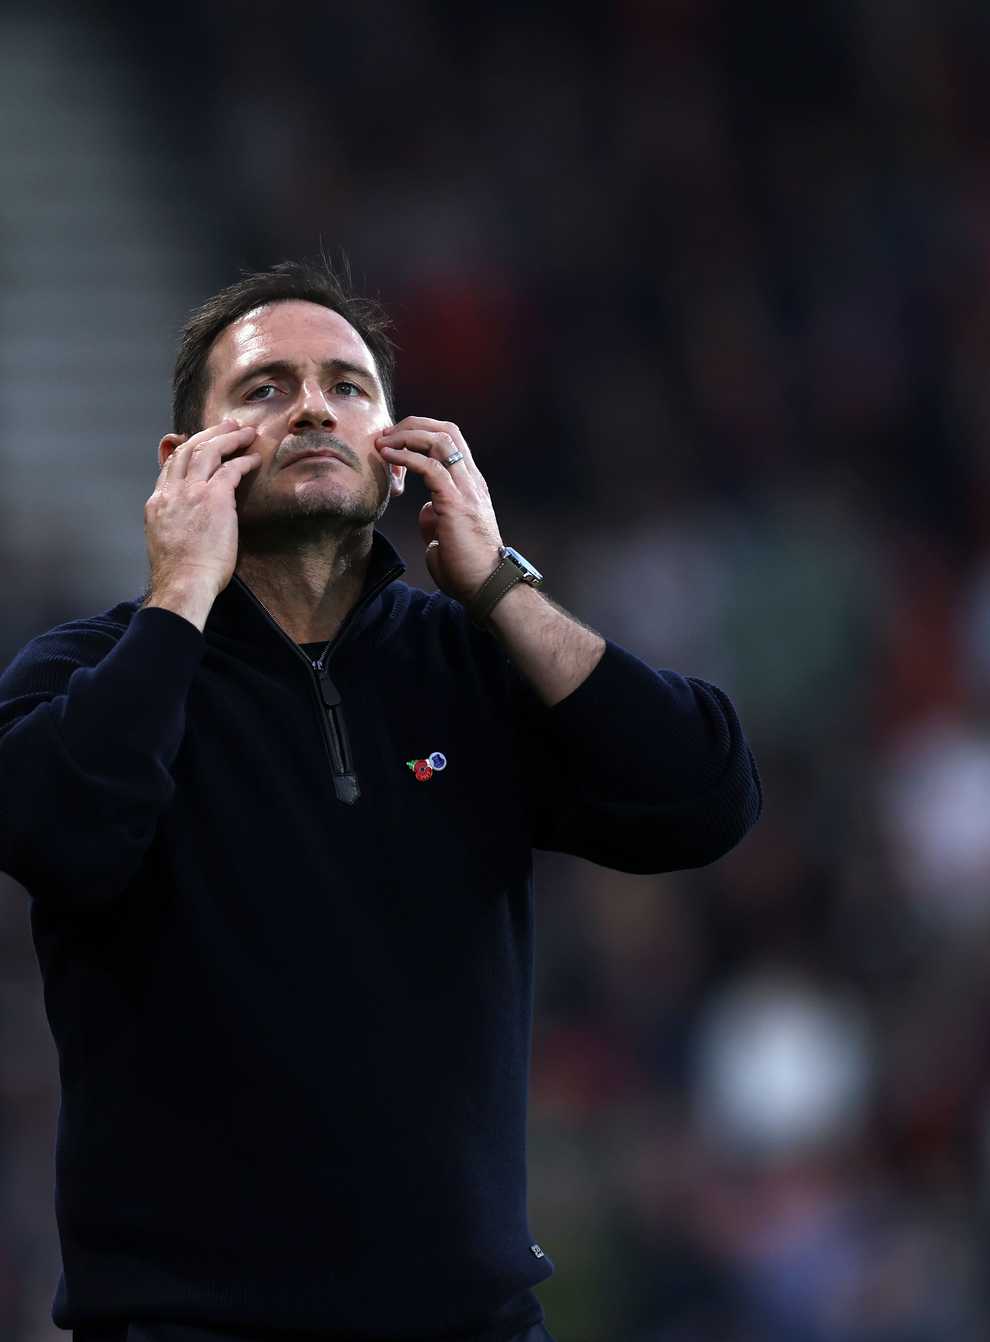 Frank Lampard has been sacked after less than a year in charge at Everton (Steven Paston/PA)